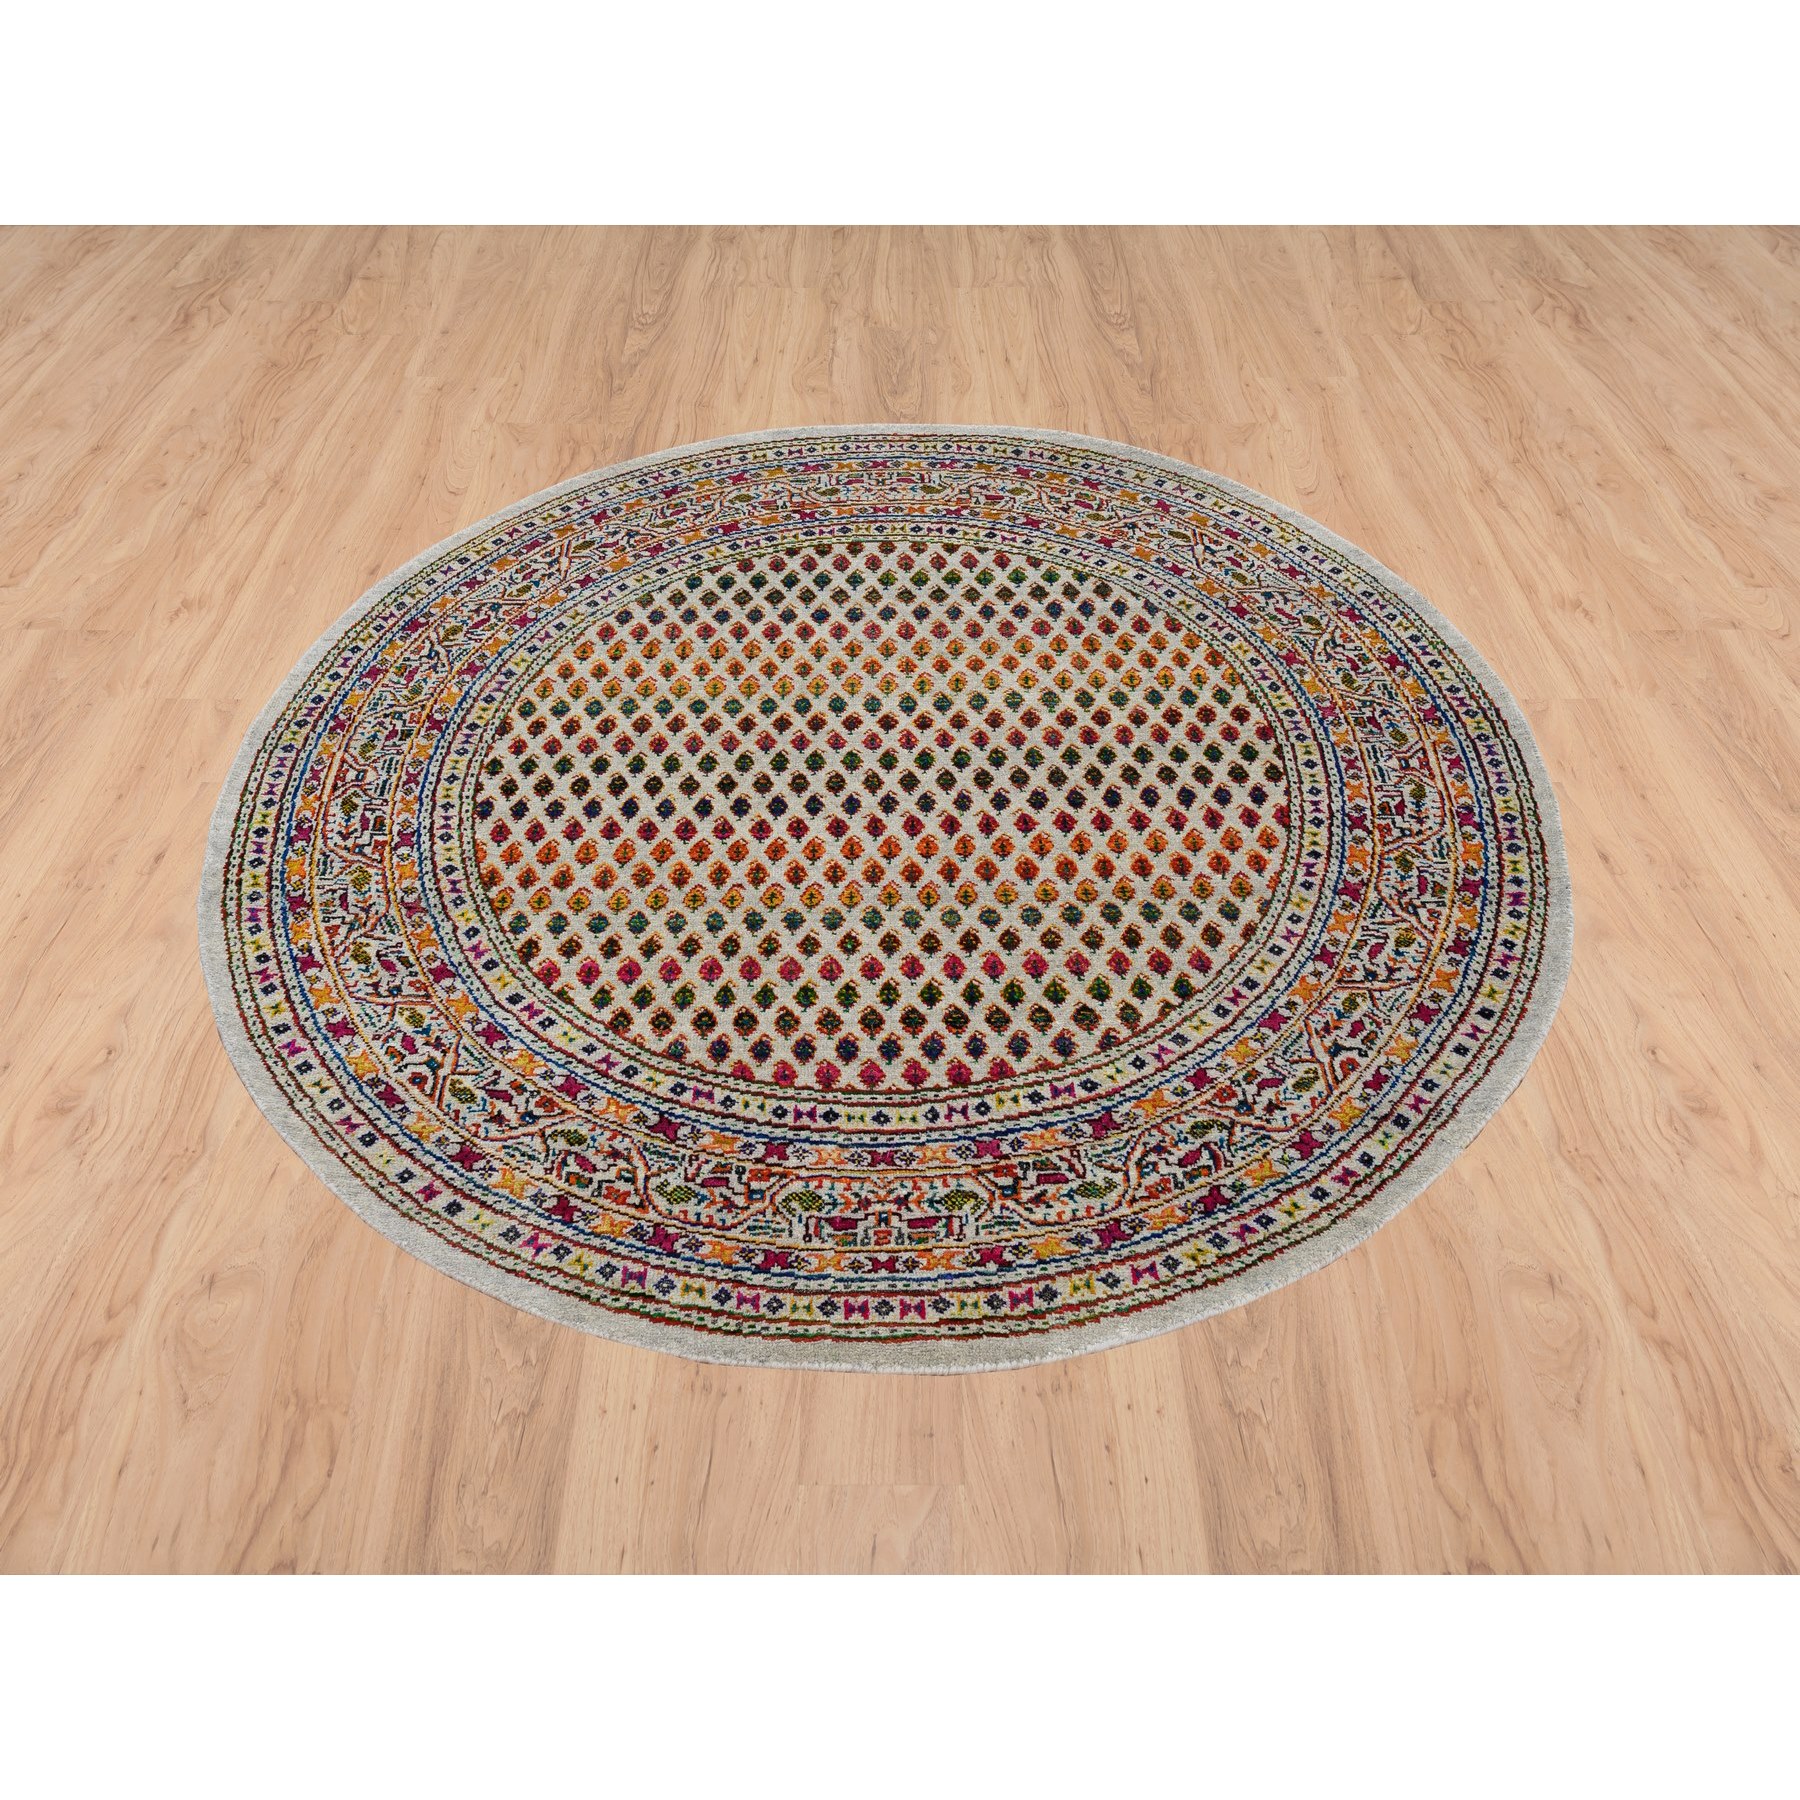 5'x5' Beige Sarouk Mir Inspired With Repetitive Boteh Design Colorful Wool And Sari Silk Hand Woven Oriental Round Rug 